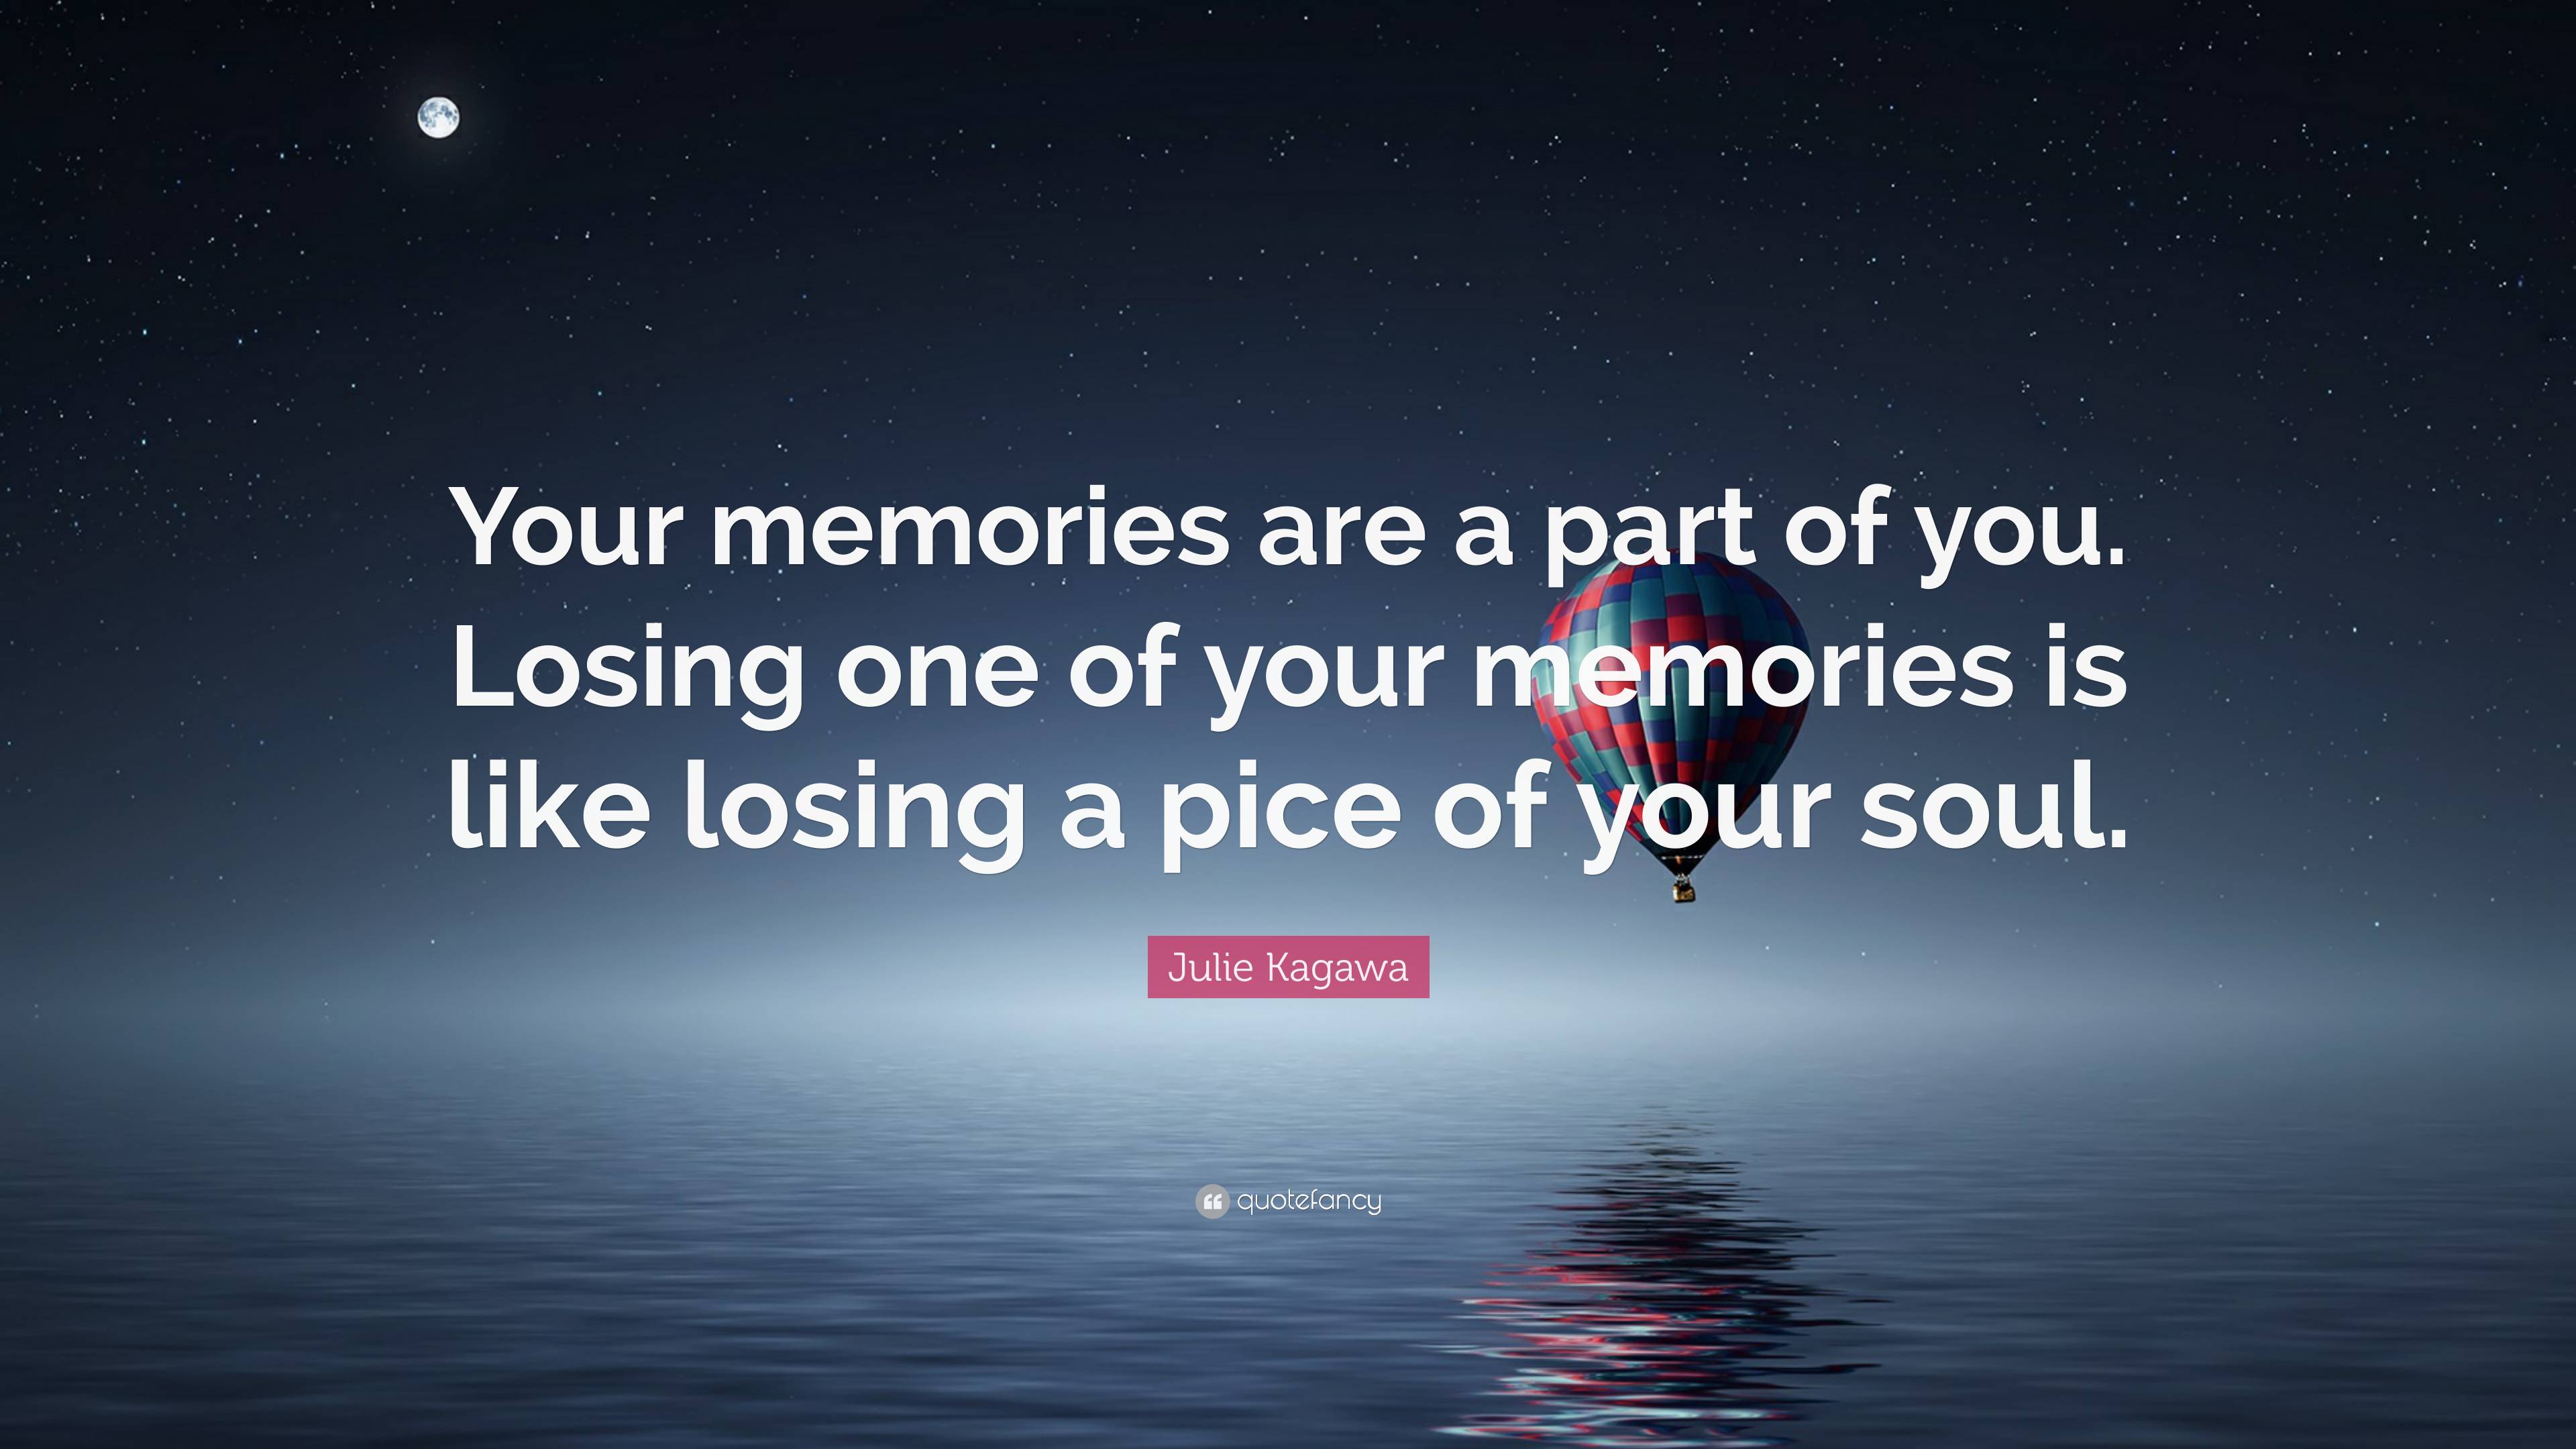 Julie Kagawa Quote: “Your memories are a part of you. Losing one of ...